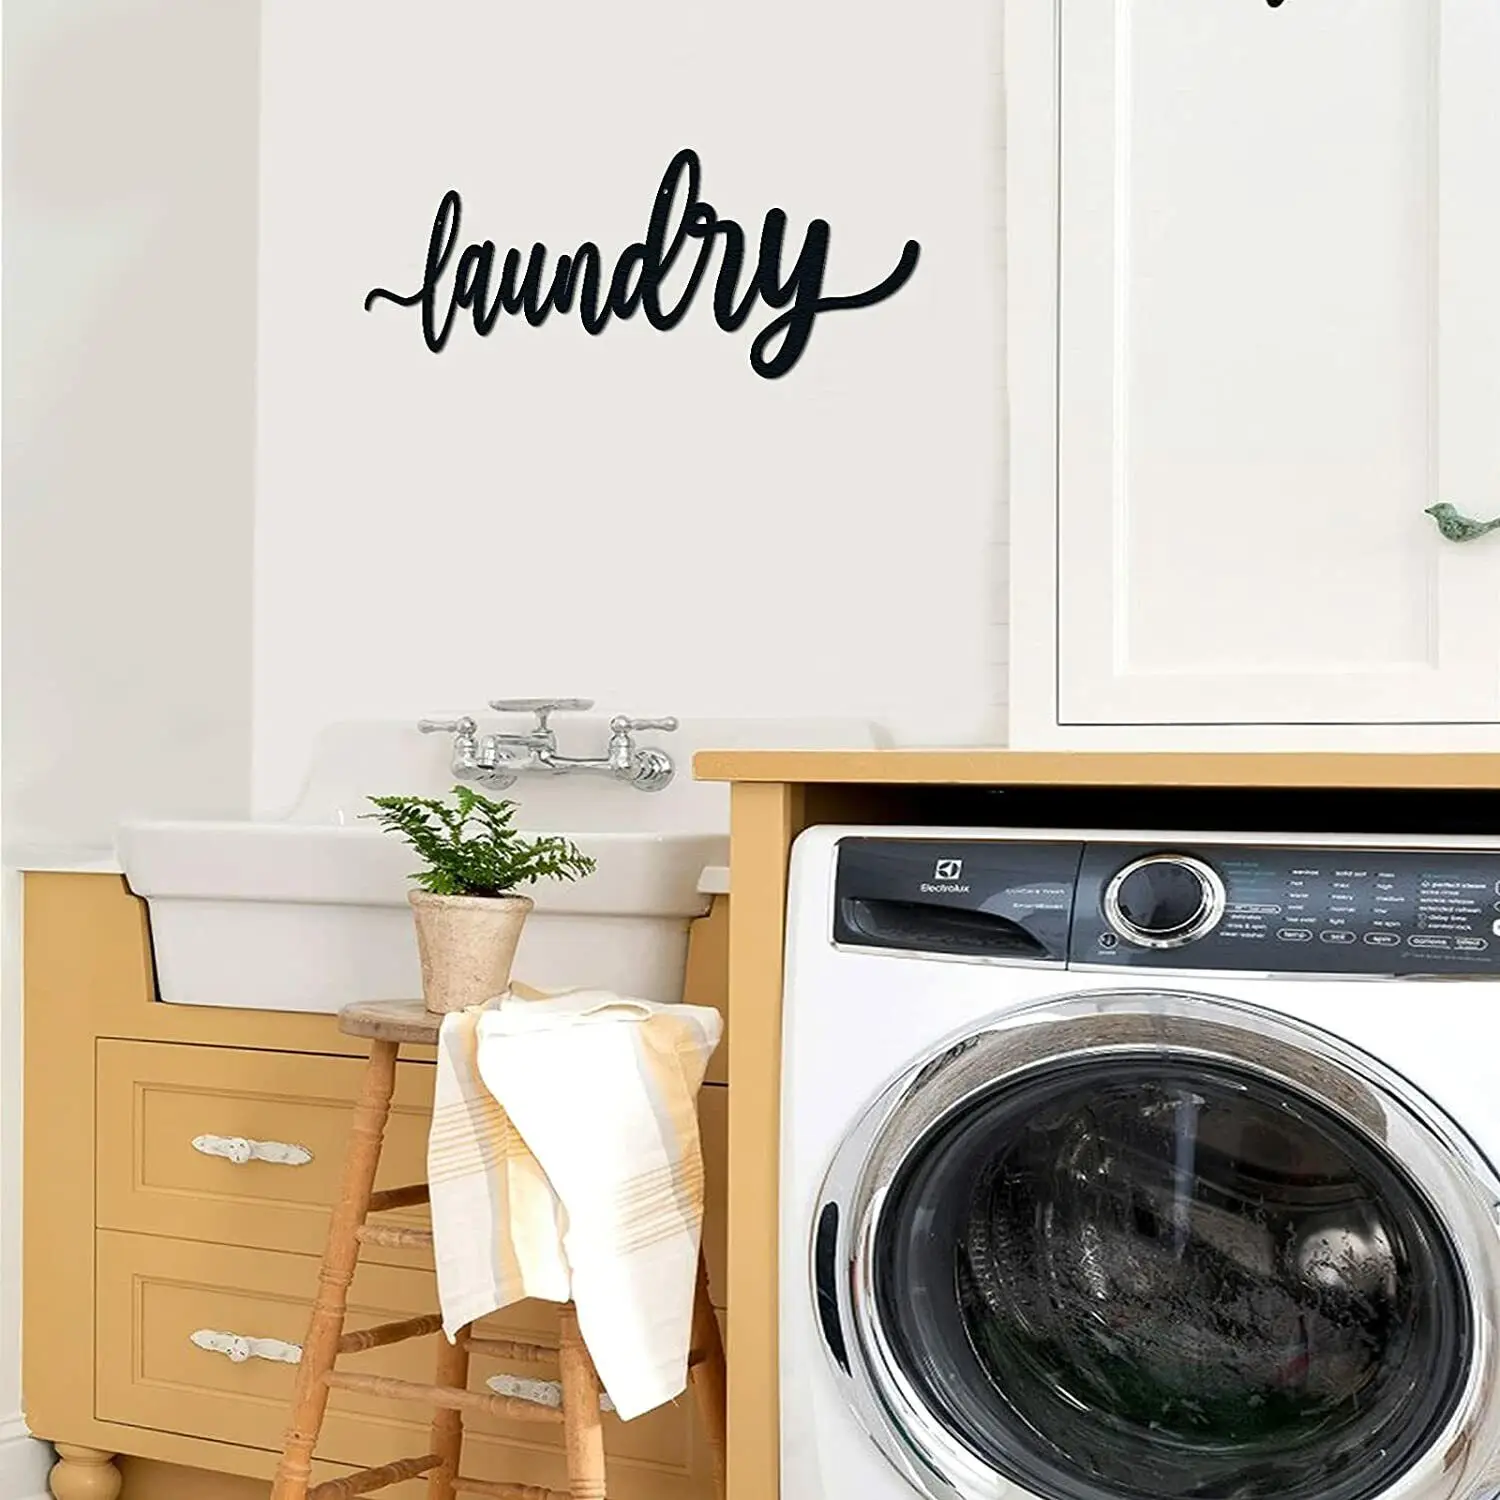 Laundry Room Metal Wall Art Décor Backdrop Decoration Rustic Laundry Room Signs Living Room/Home Decoration images - 6